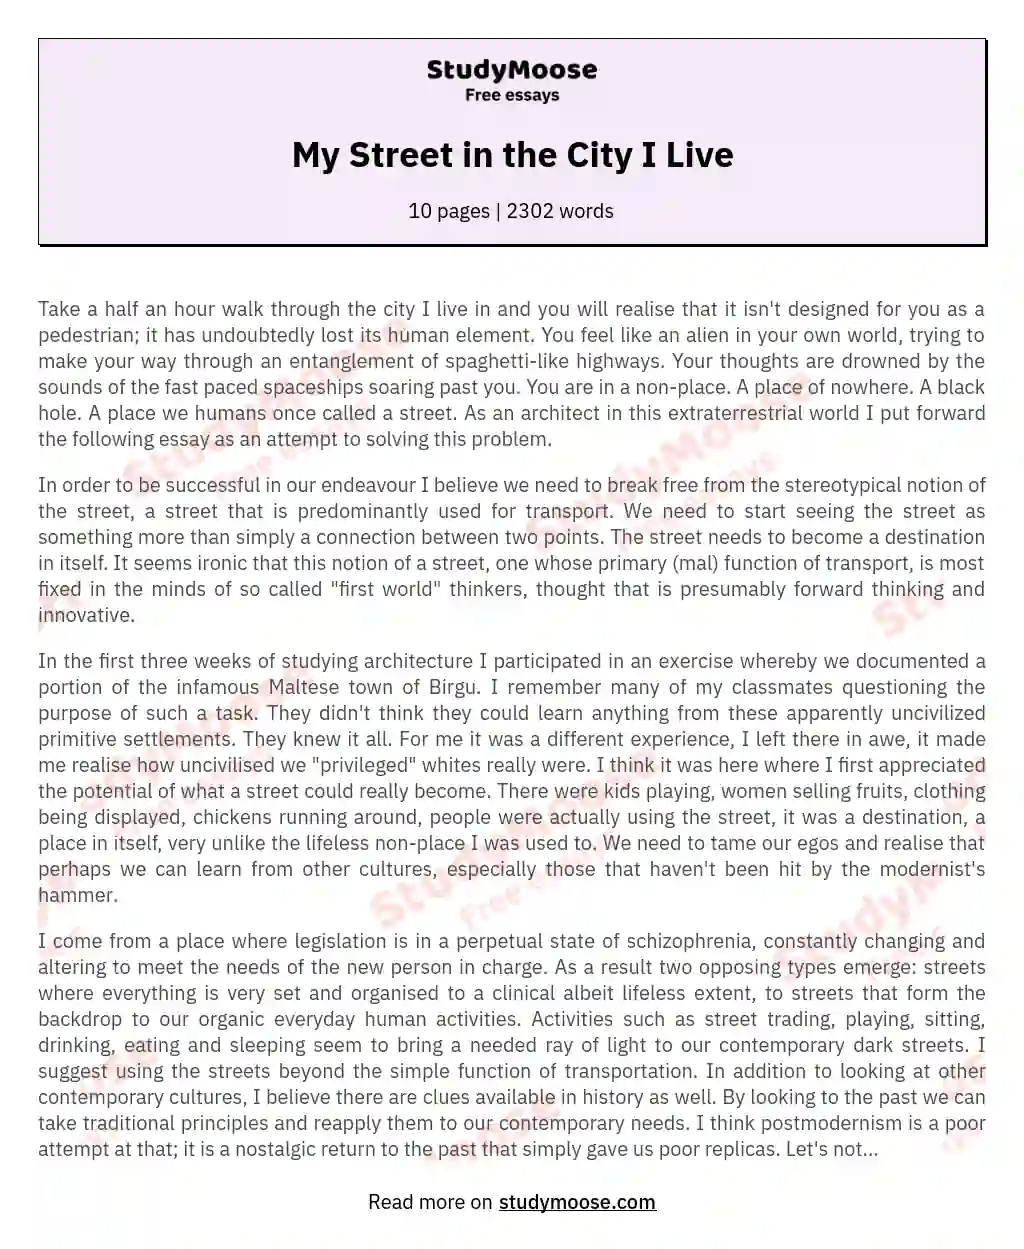 My Street in the City I Live essay